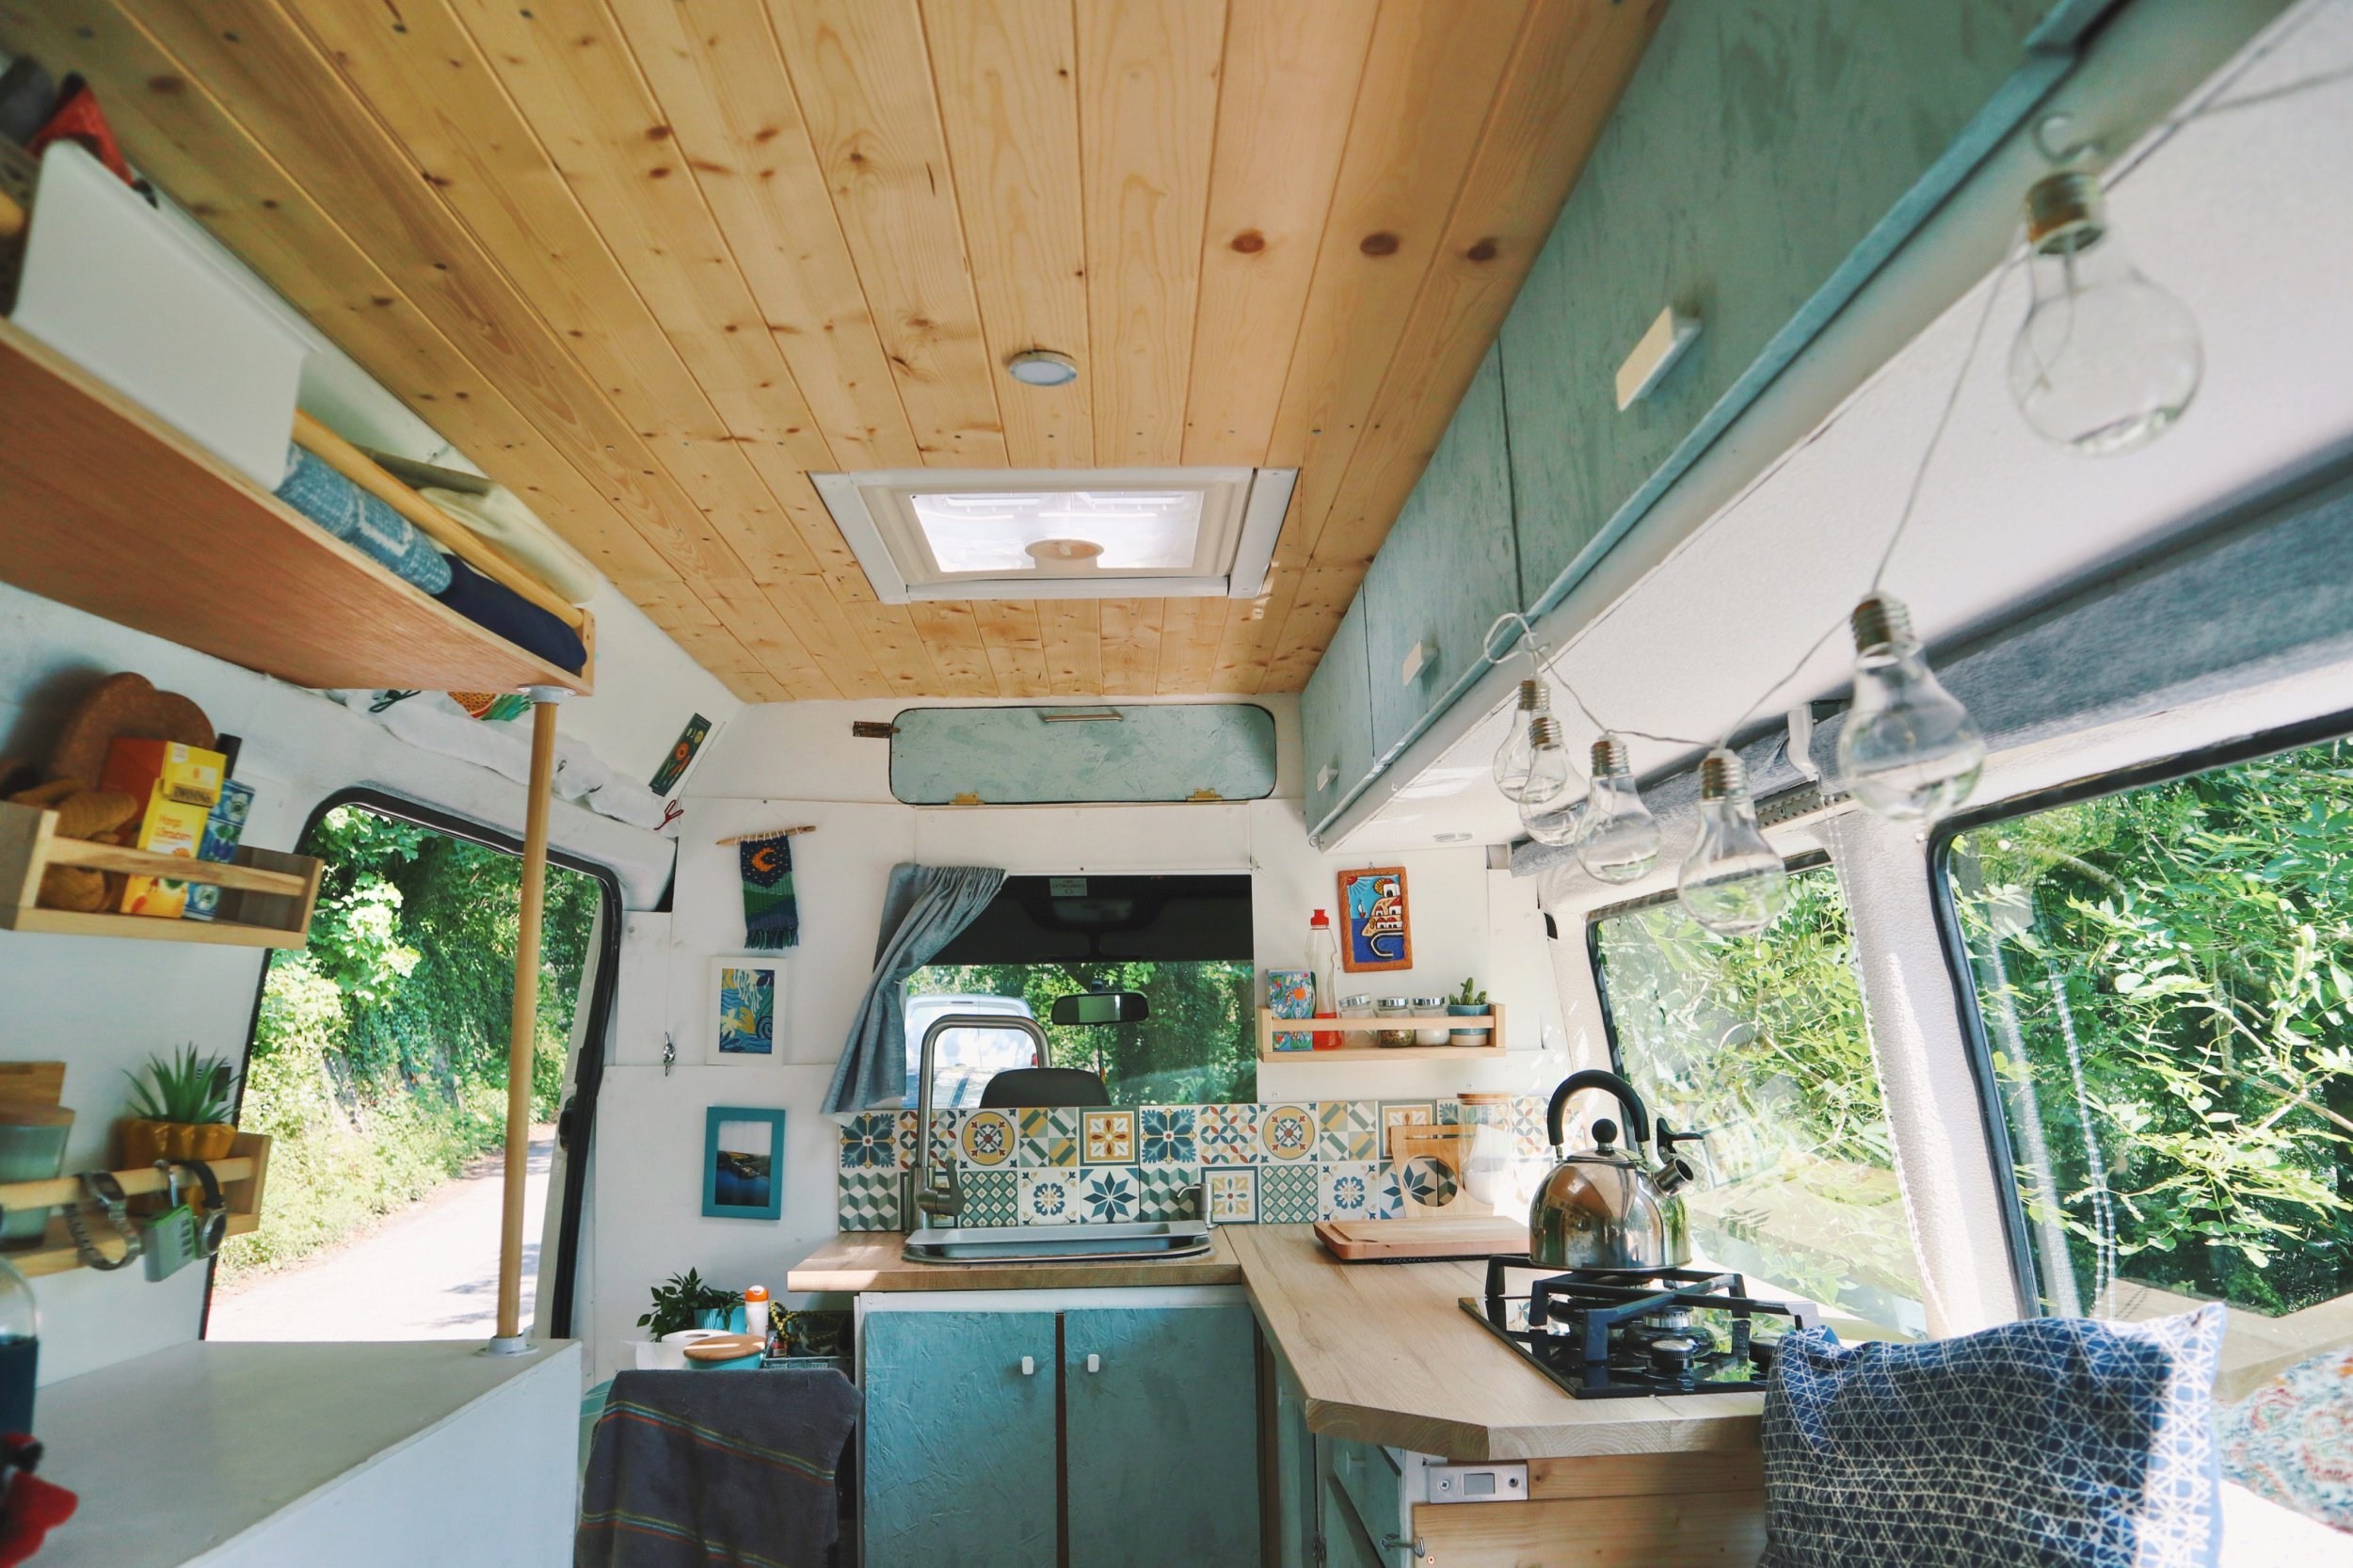 Inside the couple's renovated minibus